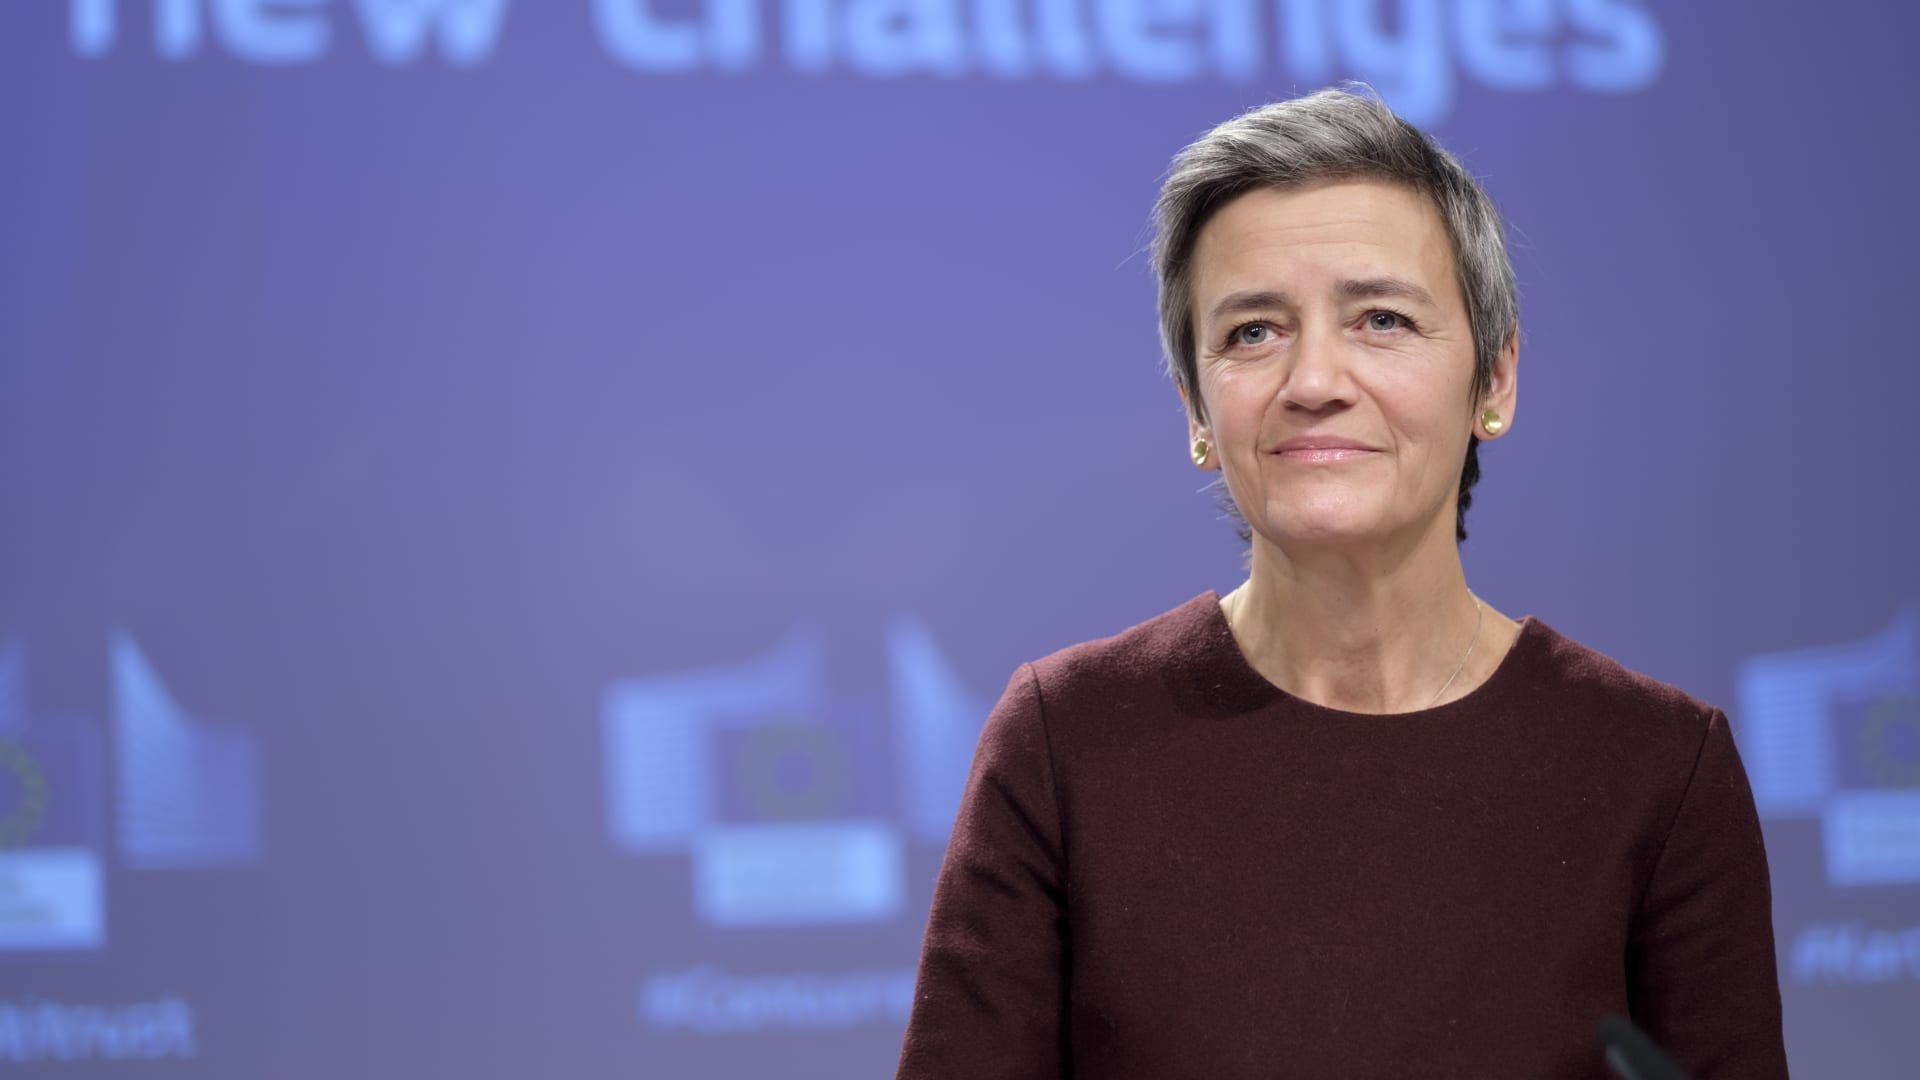 EU targets Big Tech with sweeping new antitrust rules set to become effective October